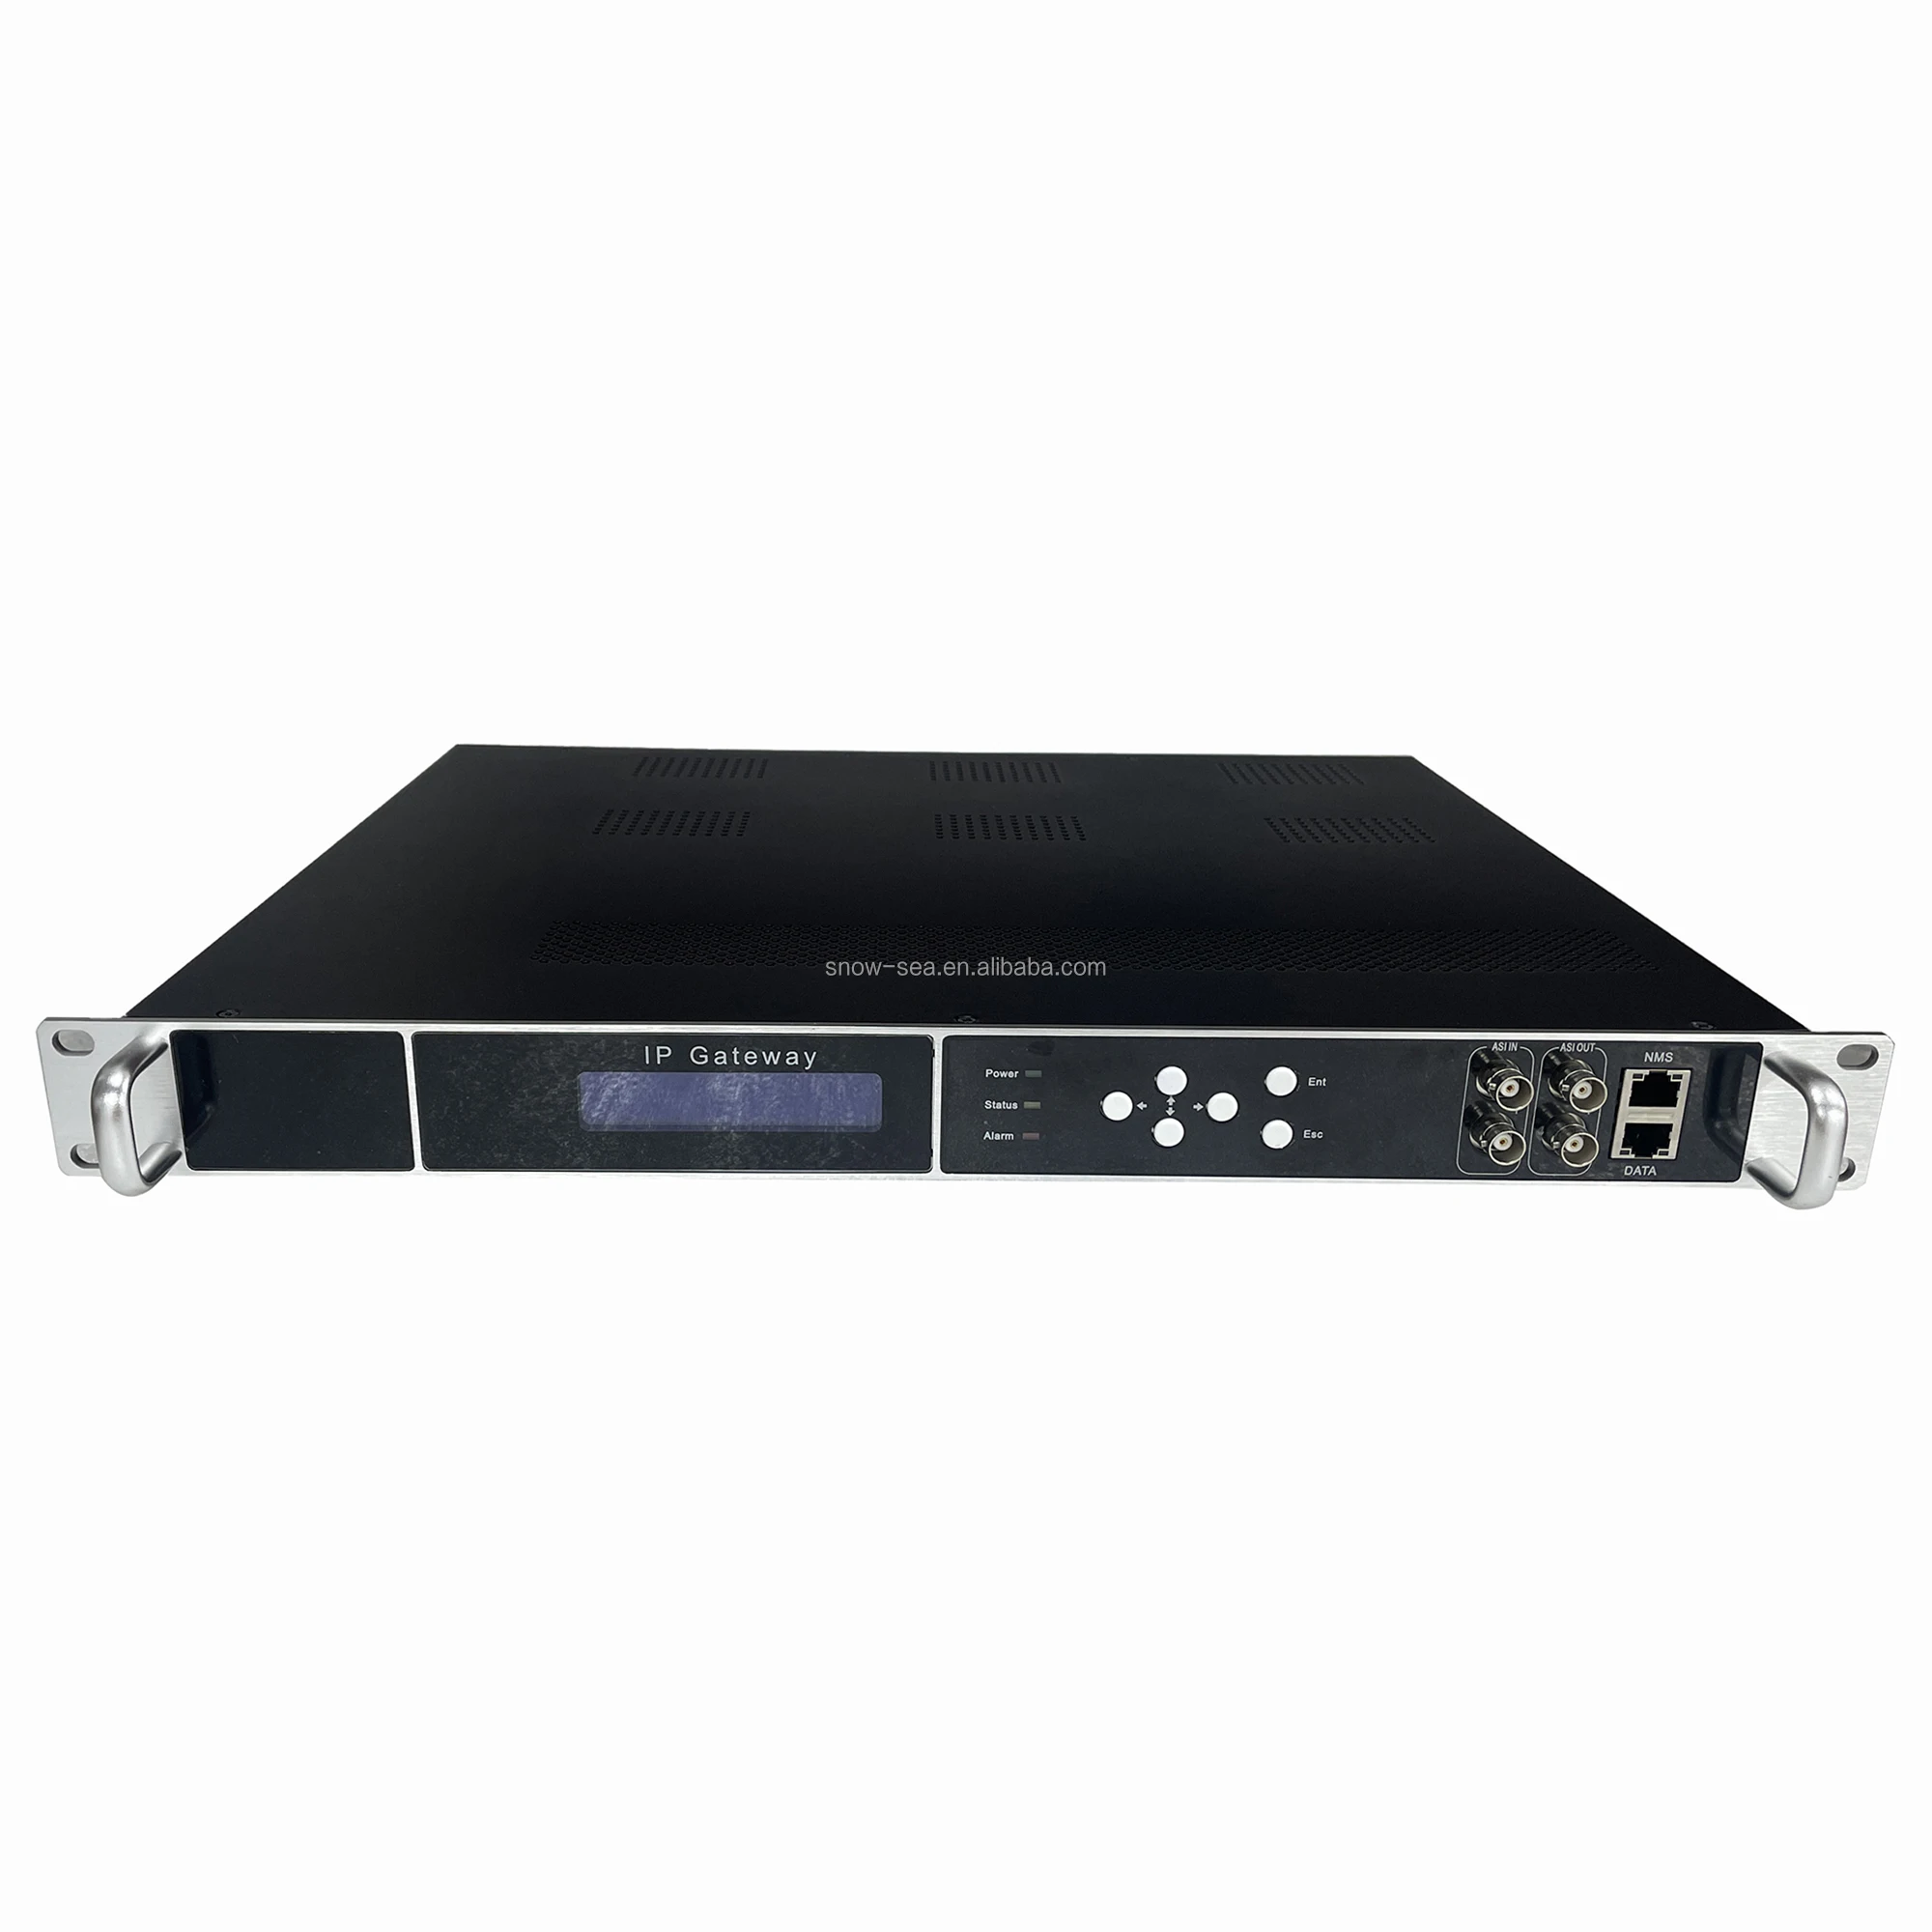 

24 Channel DVB-C/S/S2/T ISDB-T Tuner +2 ASI to Gateway RF to IP Converter